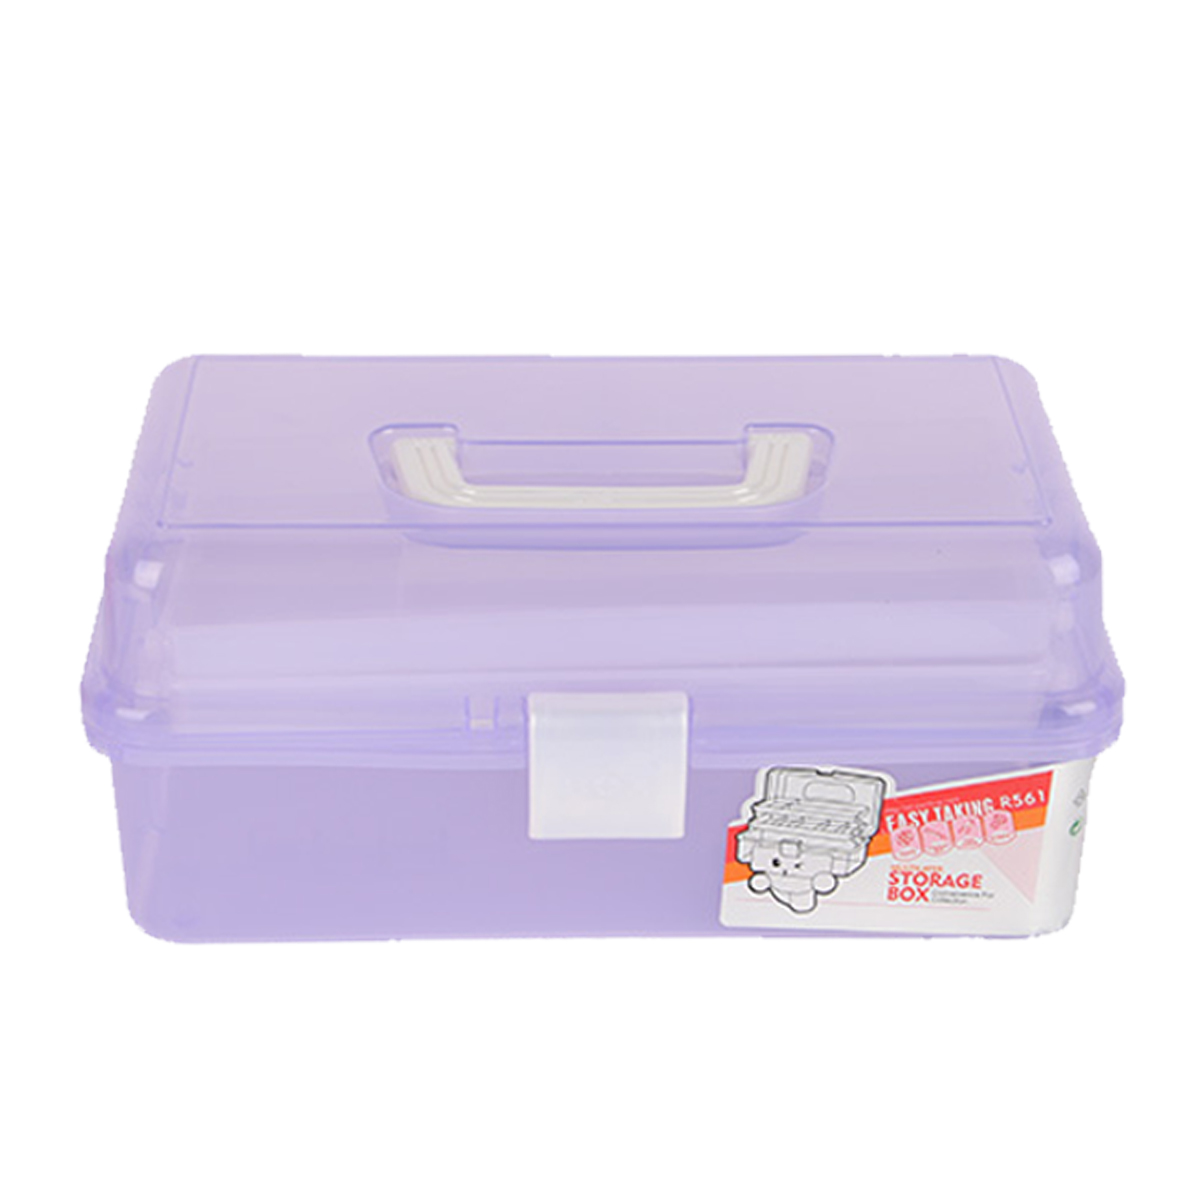 Clear-Plastic-Craft-Makeup-Organizer-Jewelry-Storage-Compartment-Tools-Box-Case-1263882-4